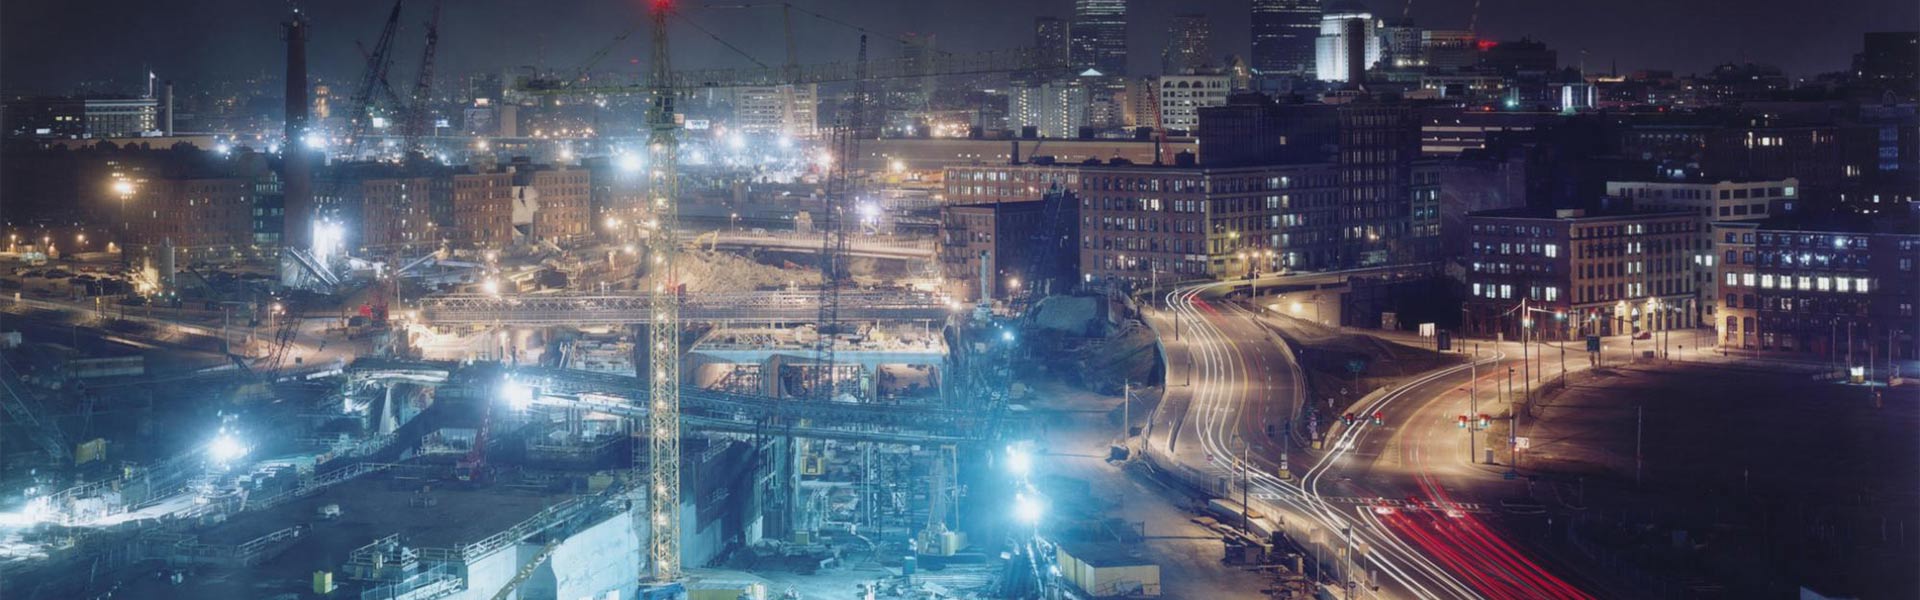 Long exposure shot of a construction site in a busy city